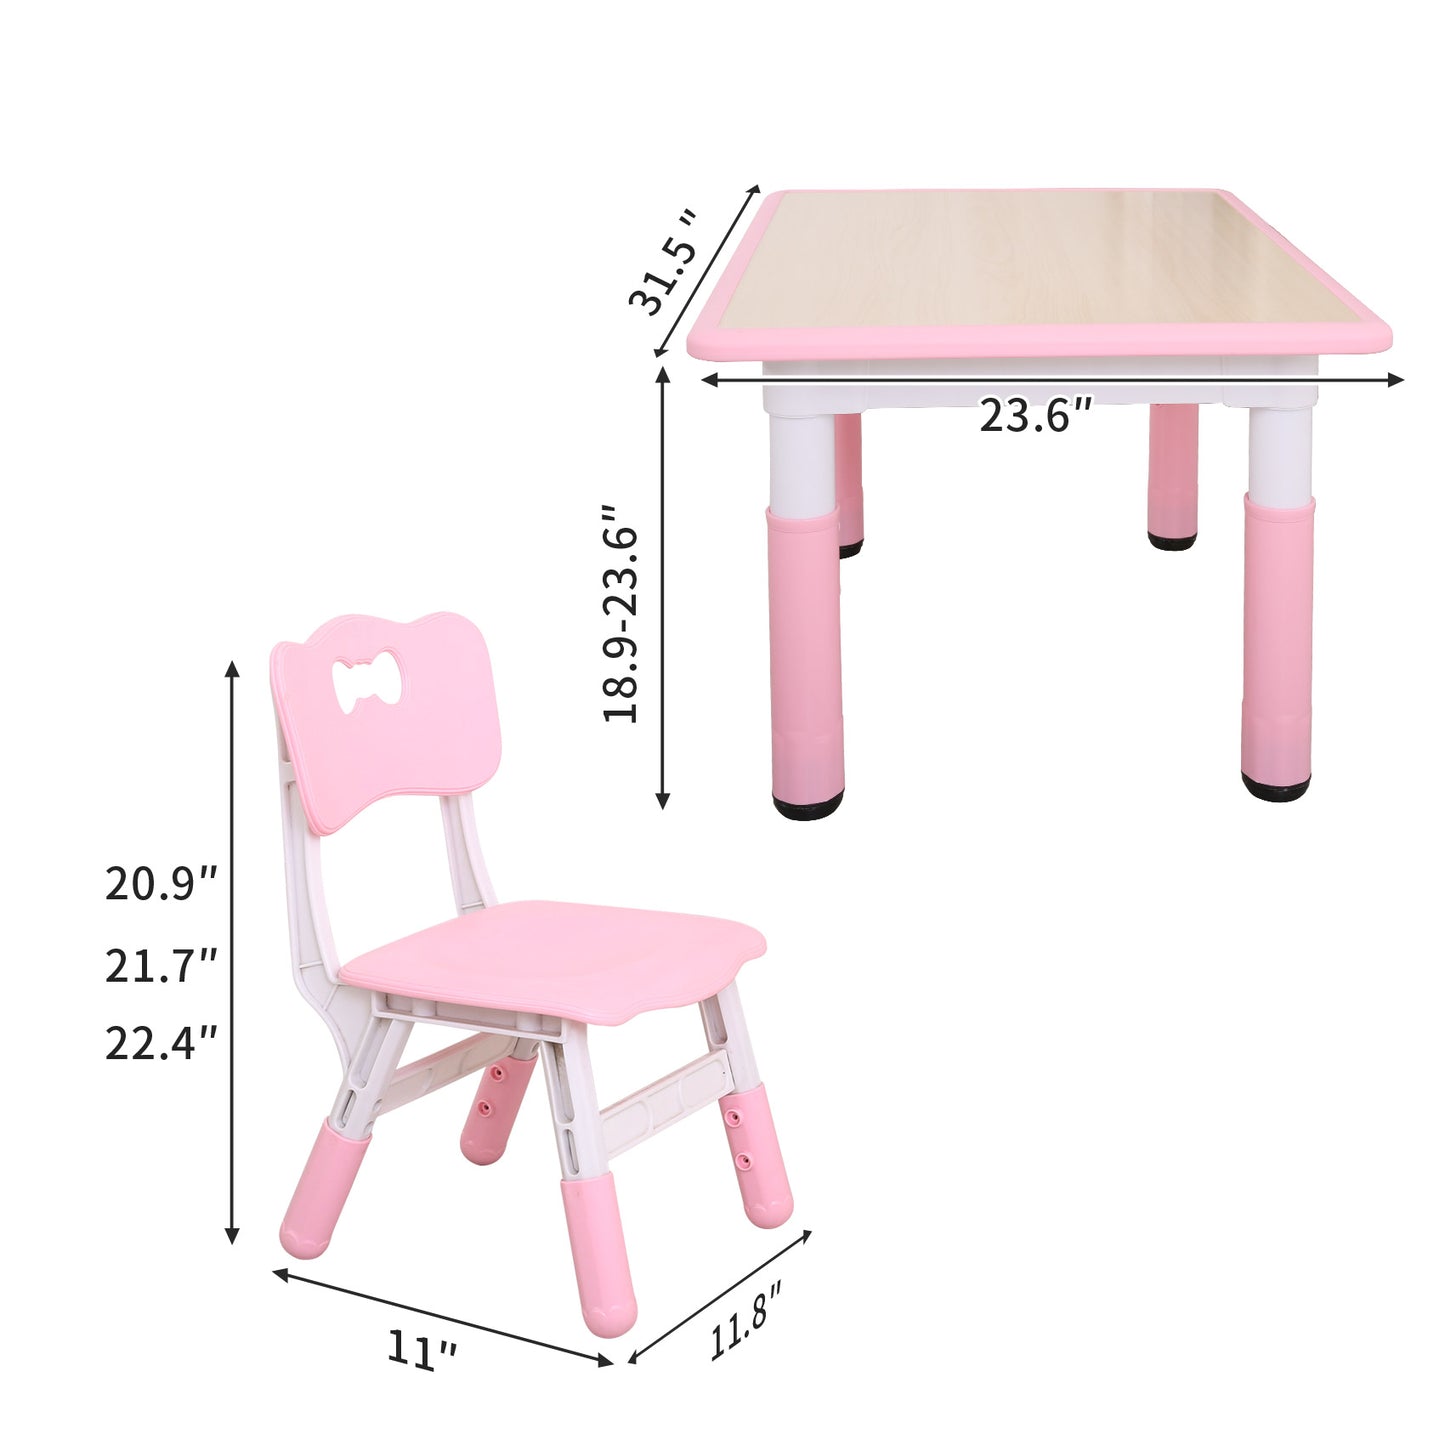 UNICOO - Kids Study Table and Chairs Set, Height Adjustable Plastic Children Art Desk with 2 Seats, Kids Multi Activity Table Set BY-60